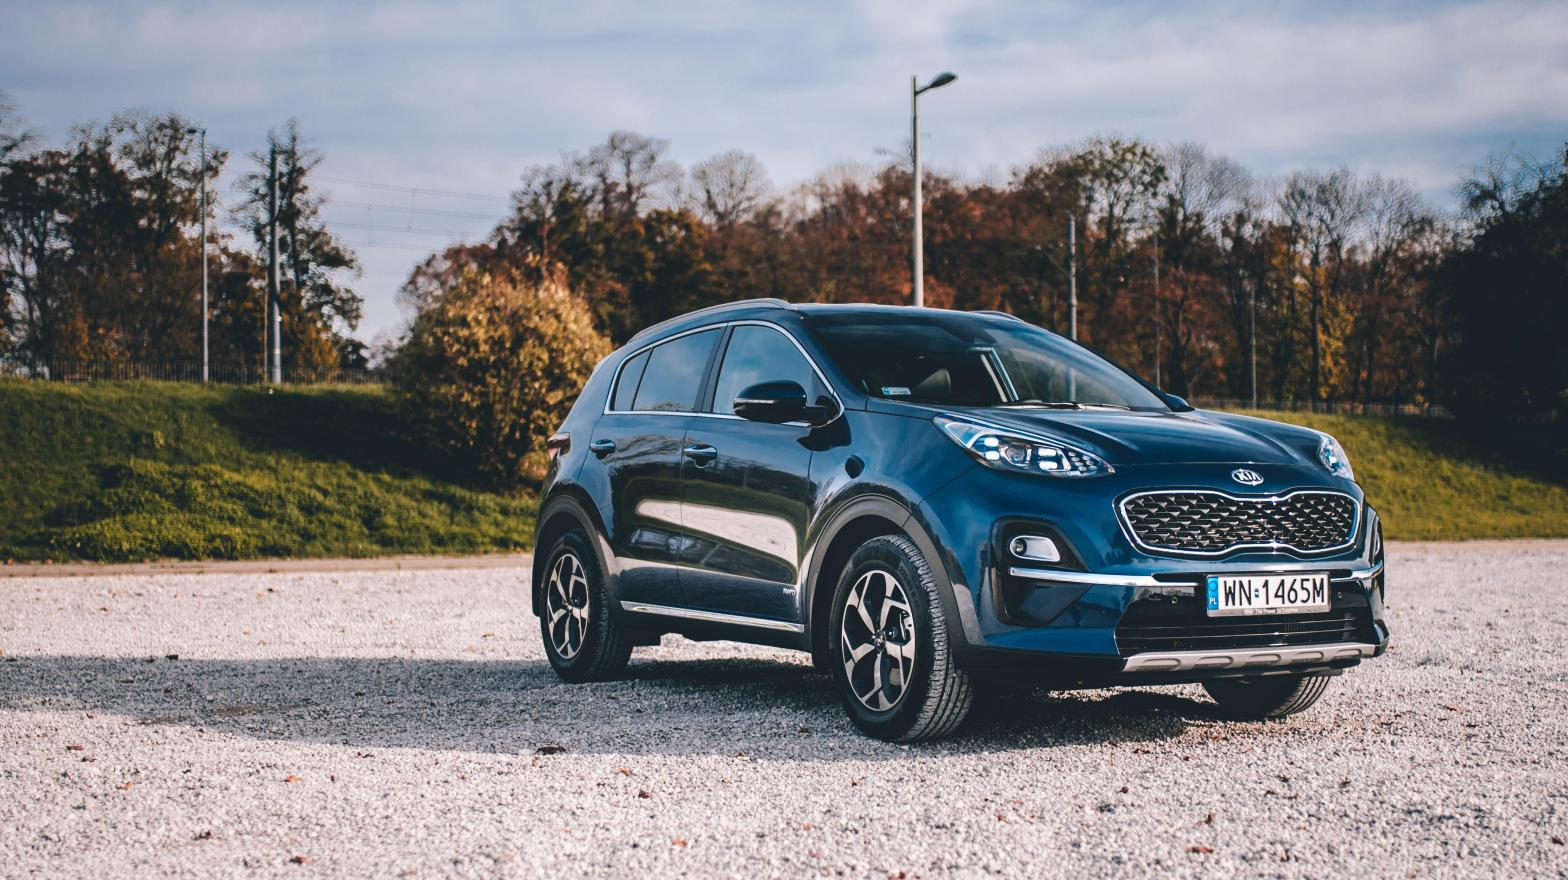 The Kia Sportage has been identified as the model most participants try to steal. (Image: Mateusz Rostek, Shutterstock)